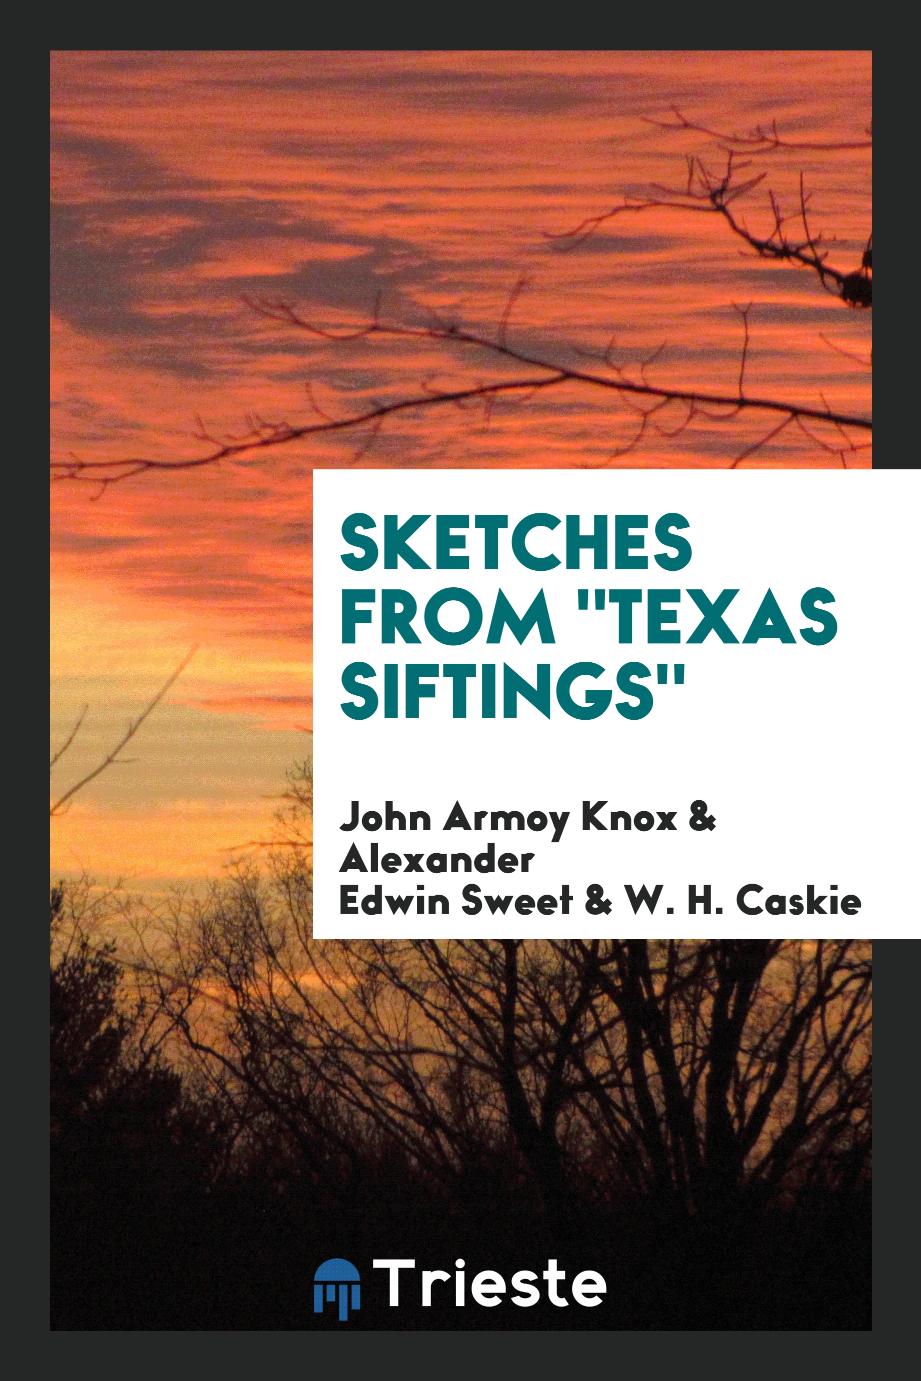 Sketches from "Texas Siftings"